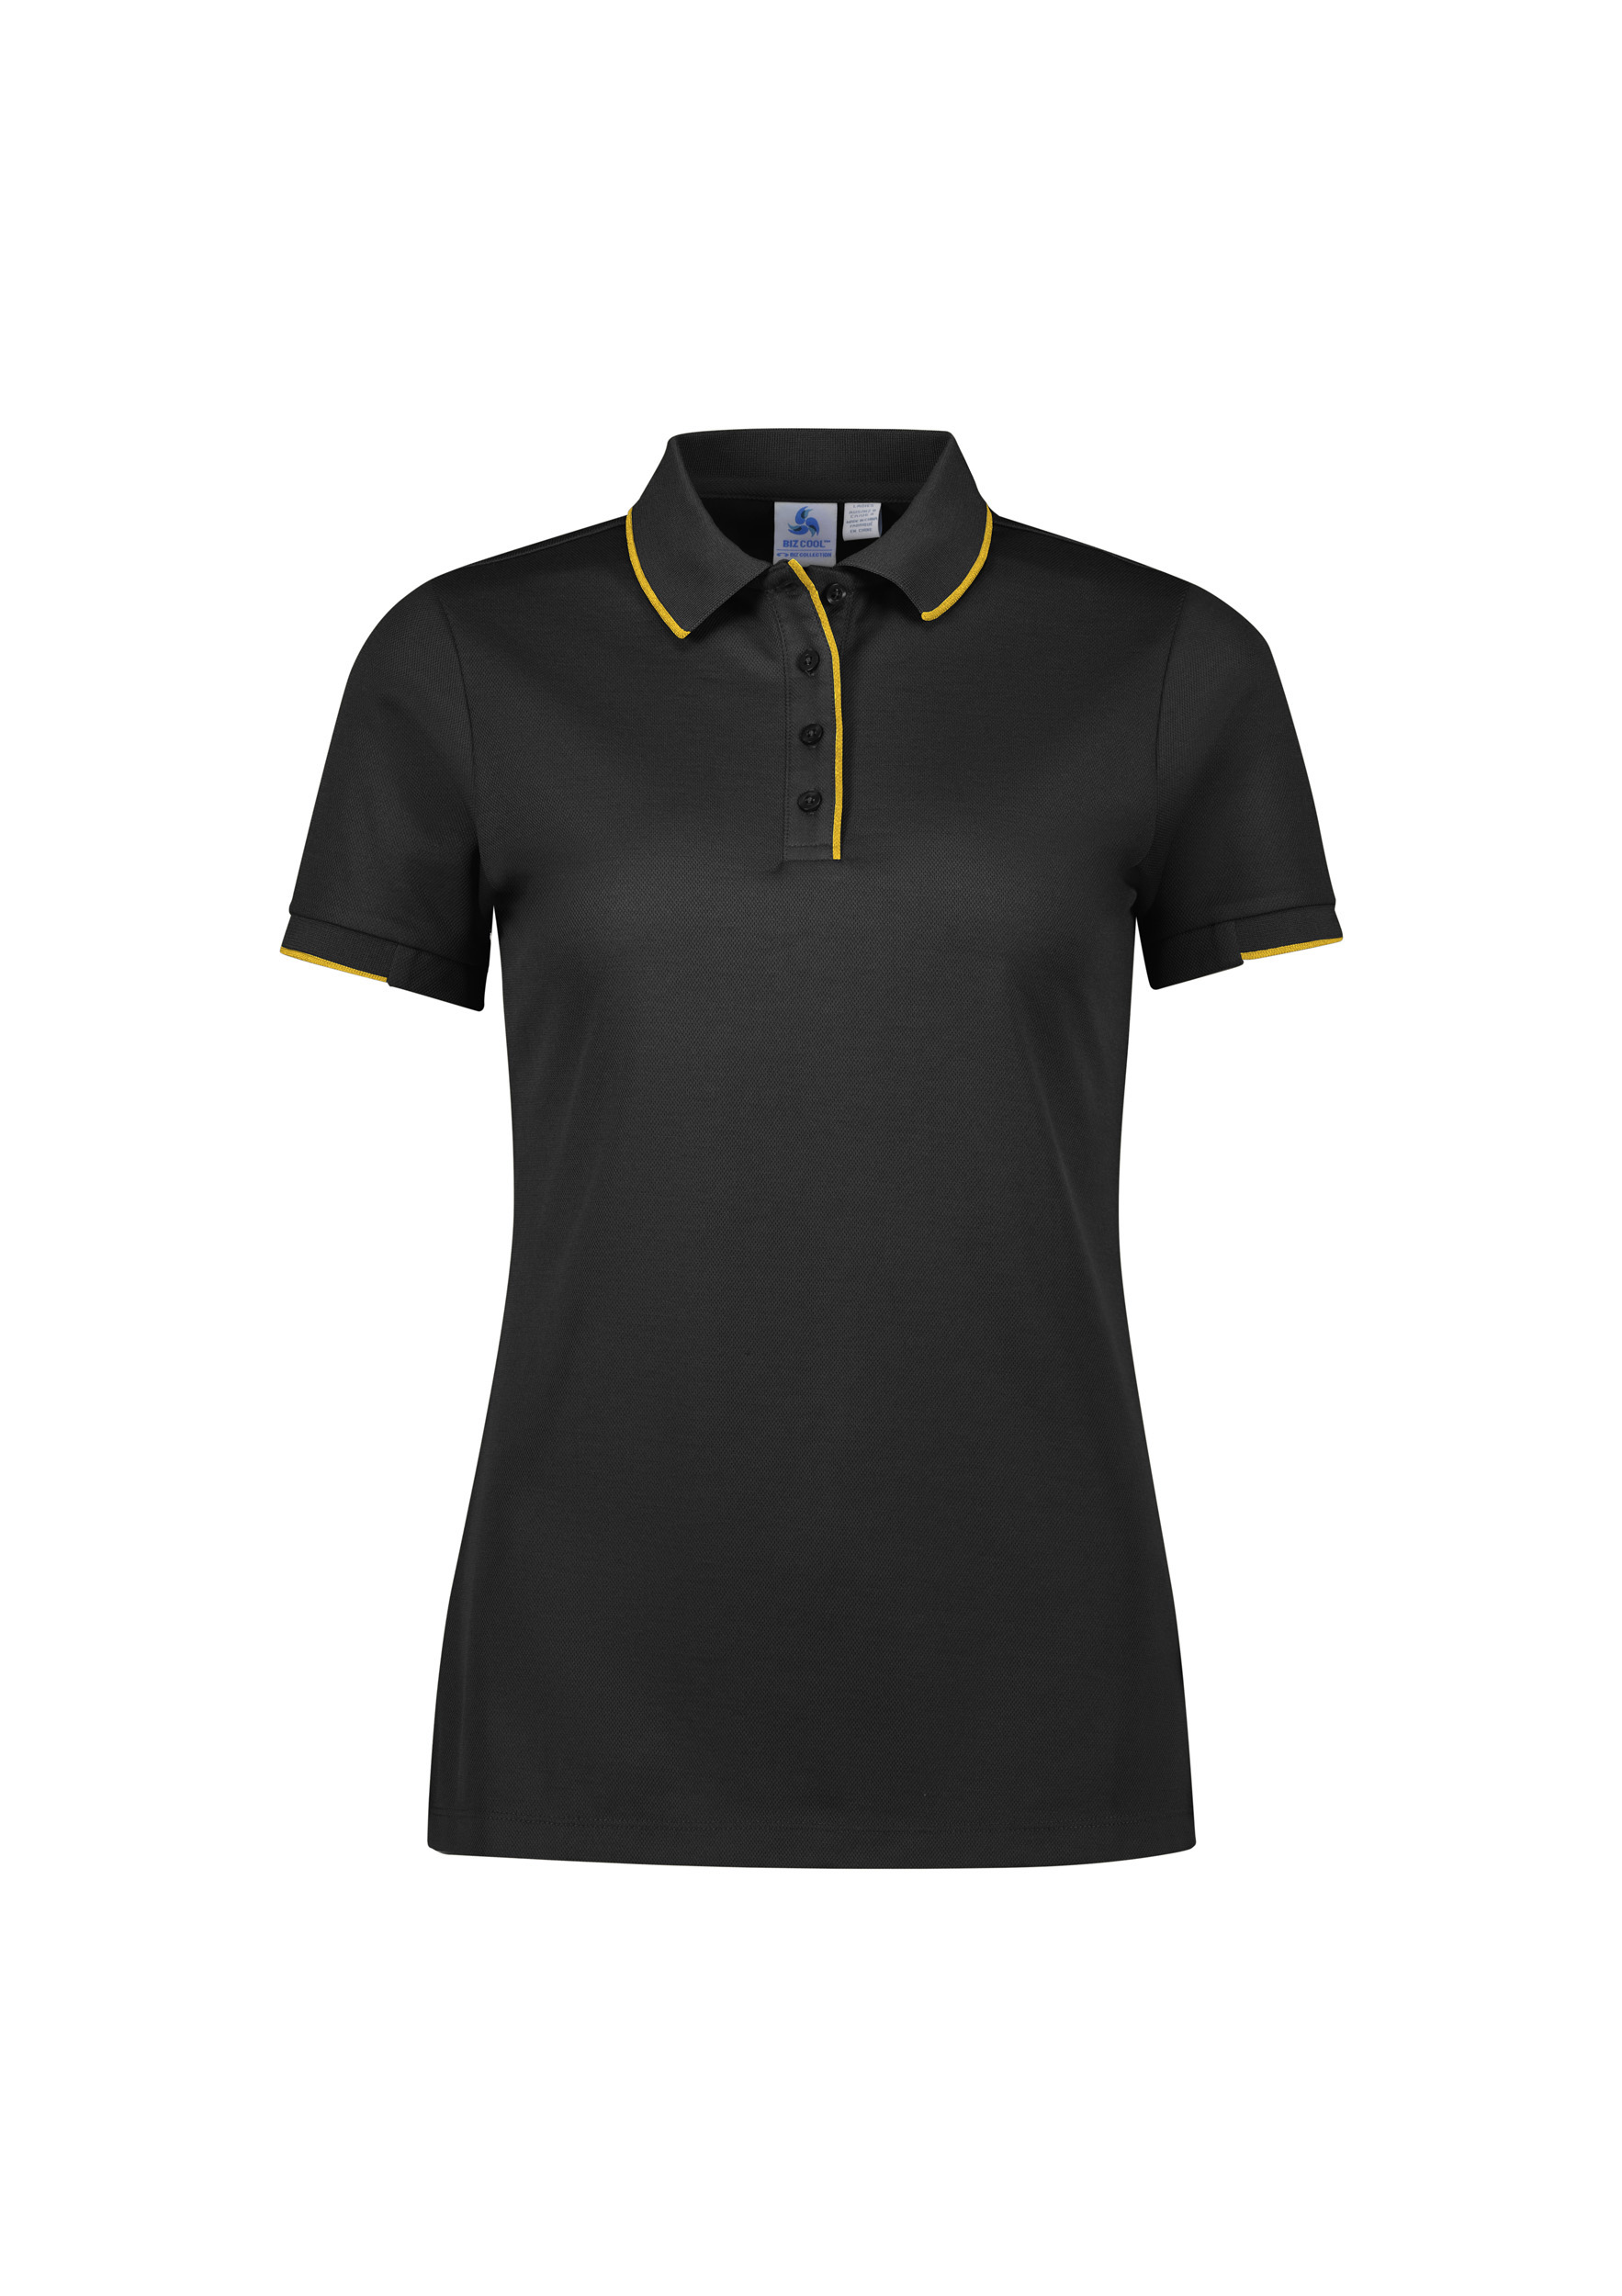 WOMENS FOCUS POLO BLK/GOLD 10 80% POLY, 20% COTTON-BACK 185GSM